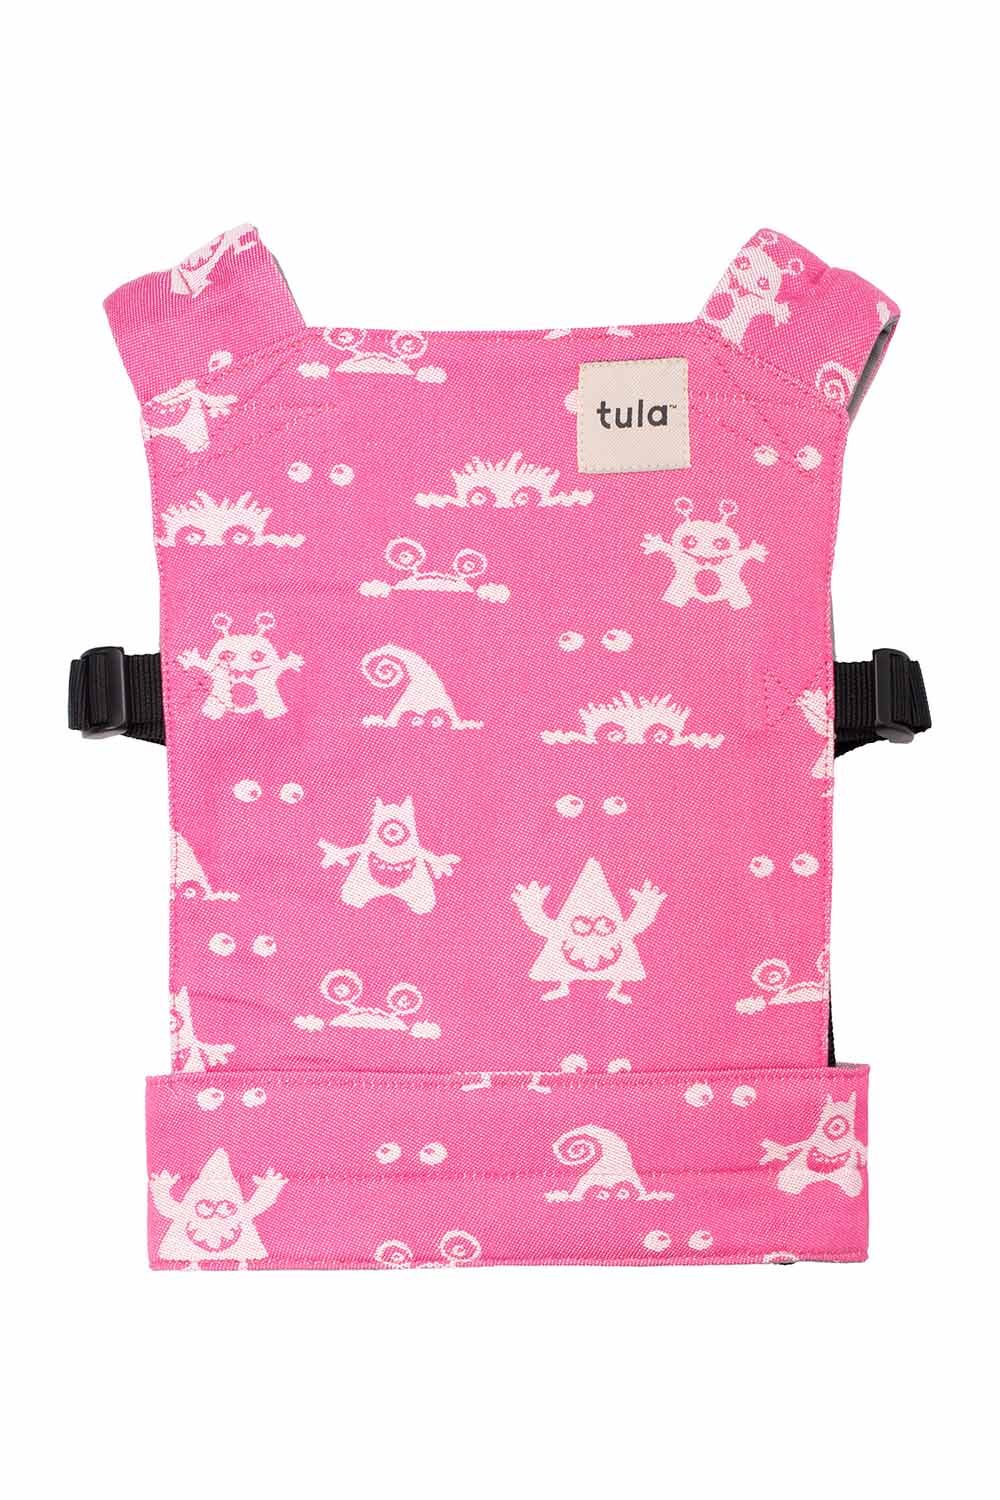 Ghoulie Smile- Tula Signature Mini Doll Carrier